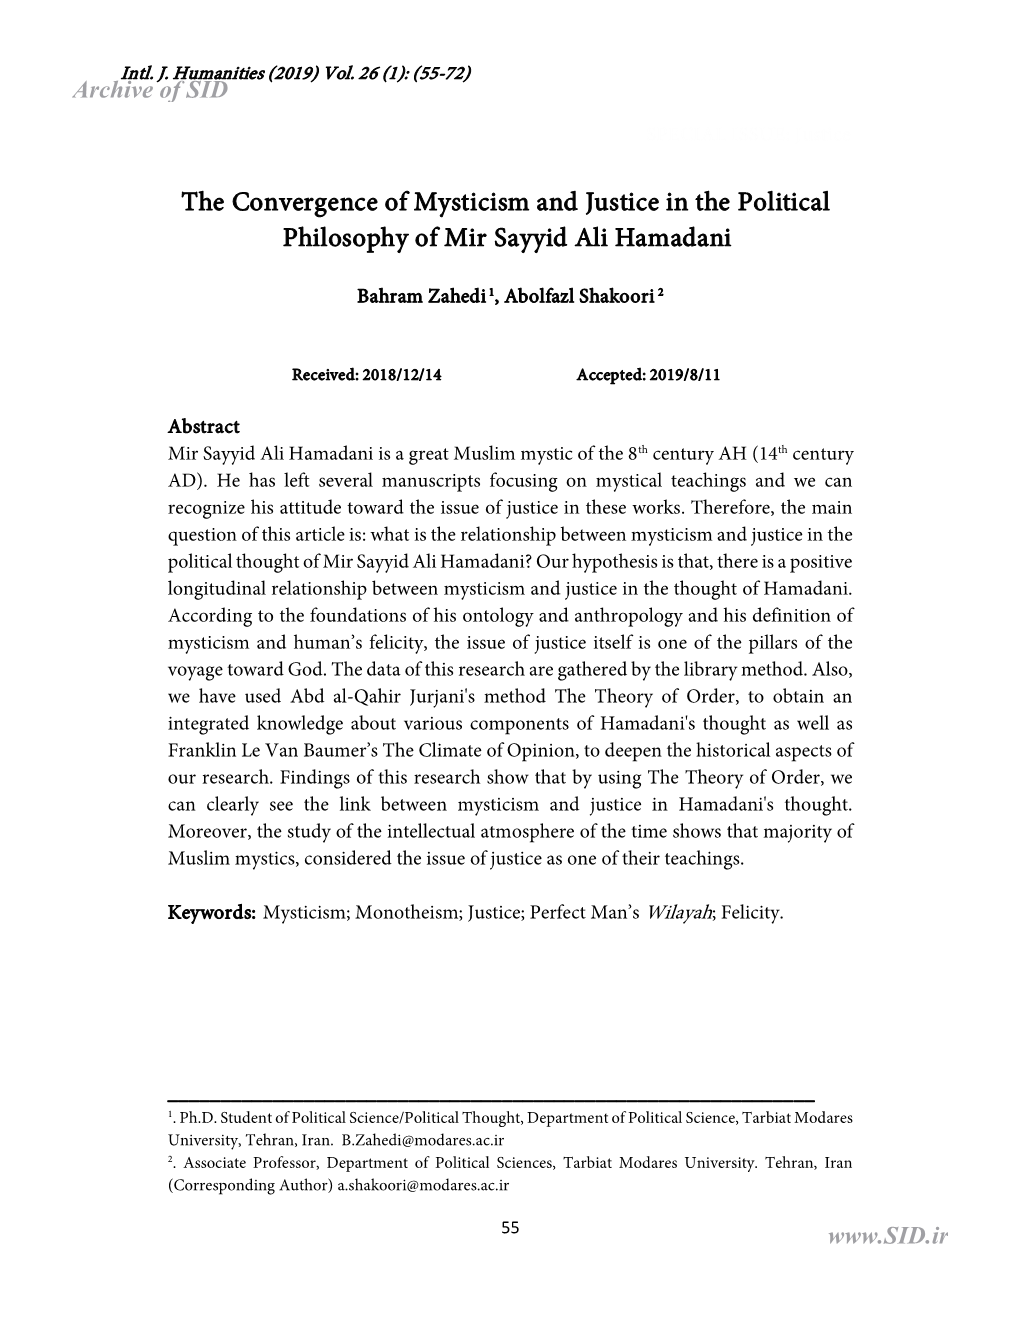 The Convergence of Mysticism and Justice in the Political Philosophy of Mir Sayyid Ali Hamadani